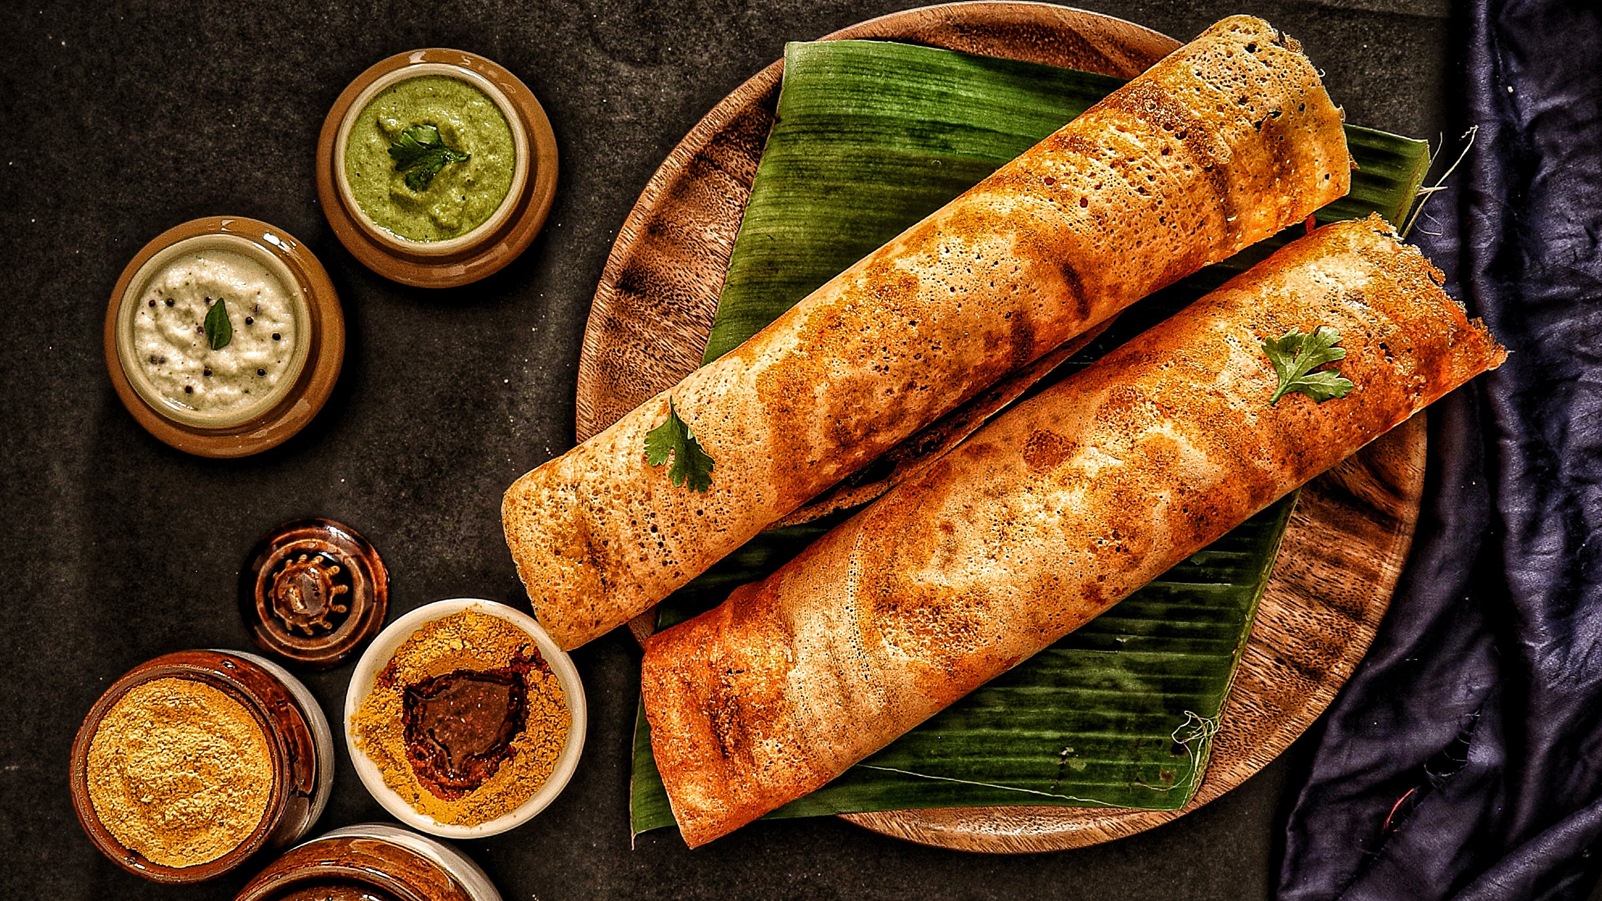 Almonds, palak and ragi dosa: Why is a diet rich in magnesium as important as iron and calcium? | Health and Wellness News